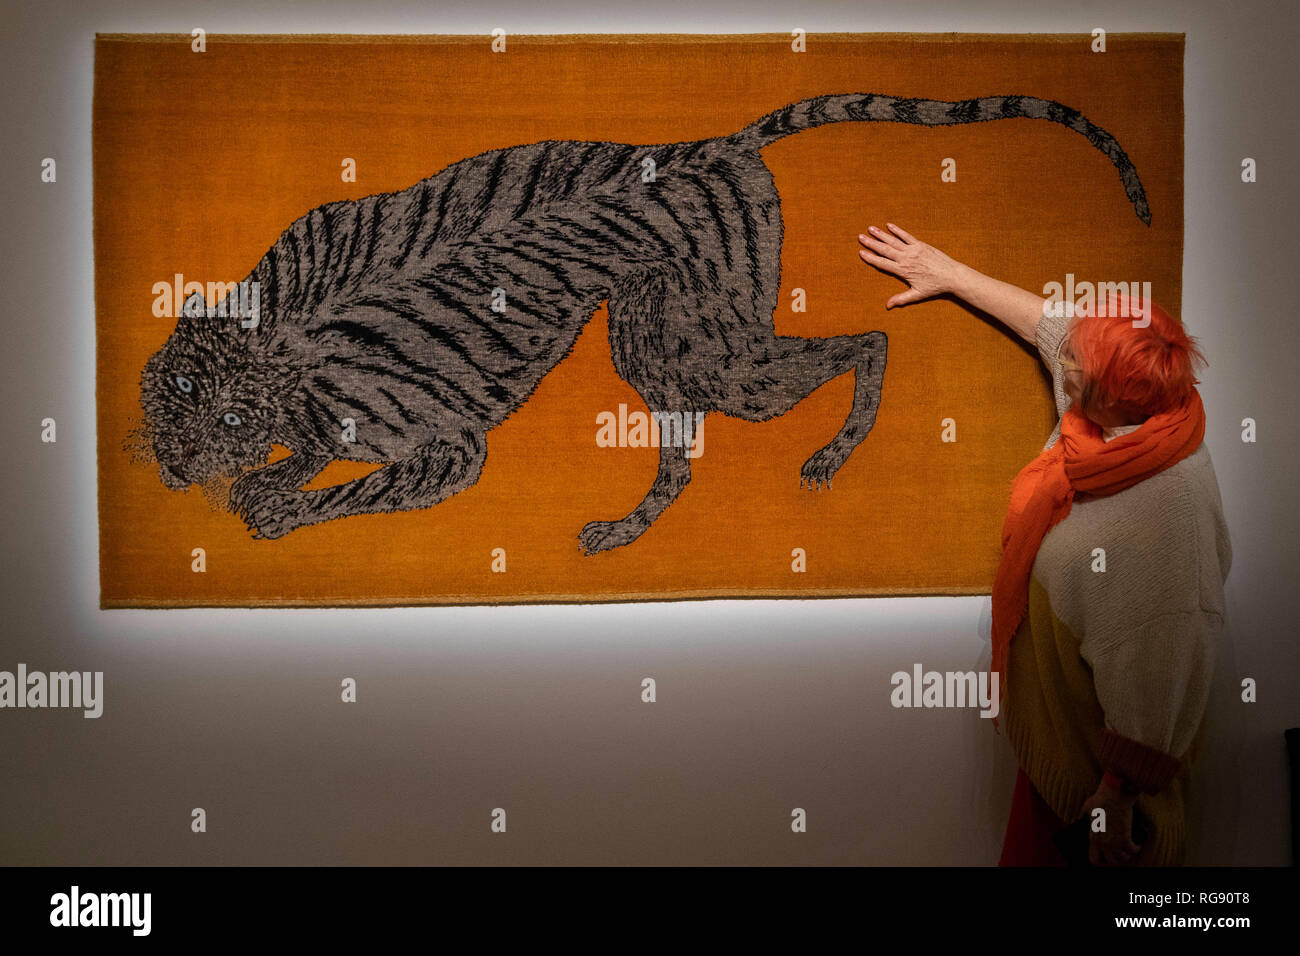 Curator Susie Allen looks at Pounce (2018-2019) by Kiki Smith at a London preview for Sotheby's Tomorrow's Tigers fundraising project which is designed to raise awareness and funds in support of the TX2 goal – a global commitment to double tiger numbers in the wild by 2022. Stock Photo